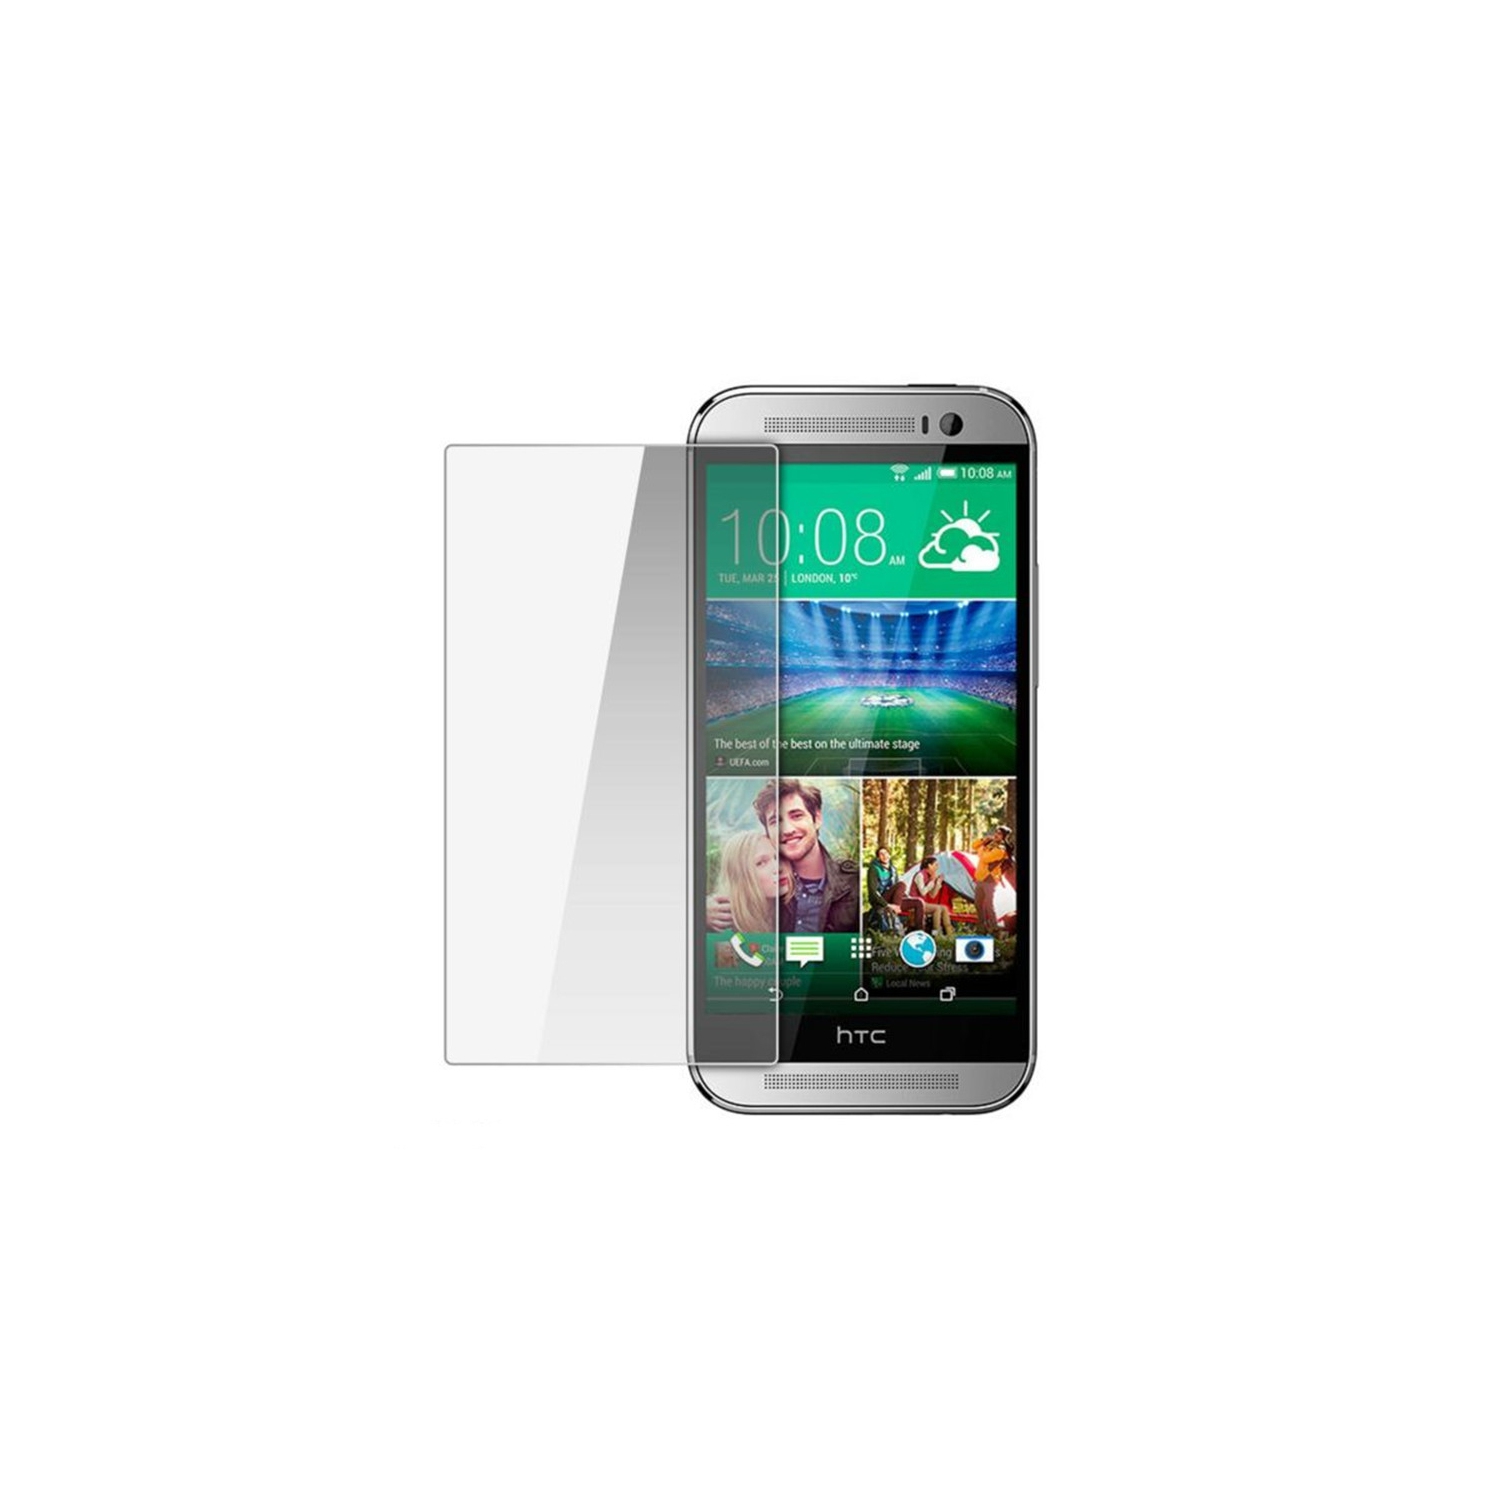 【2 Packs】 CSmart Premium Tempered Glass Screen Protector for HTC M8, Case Friendly & Bubble Free